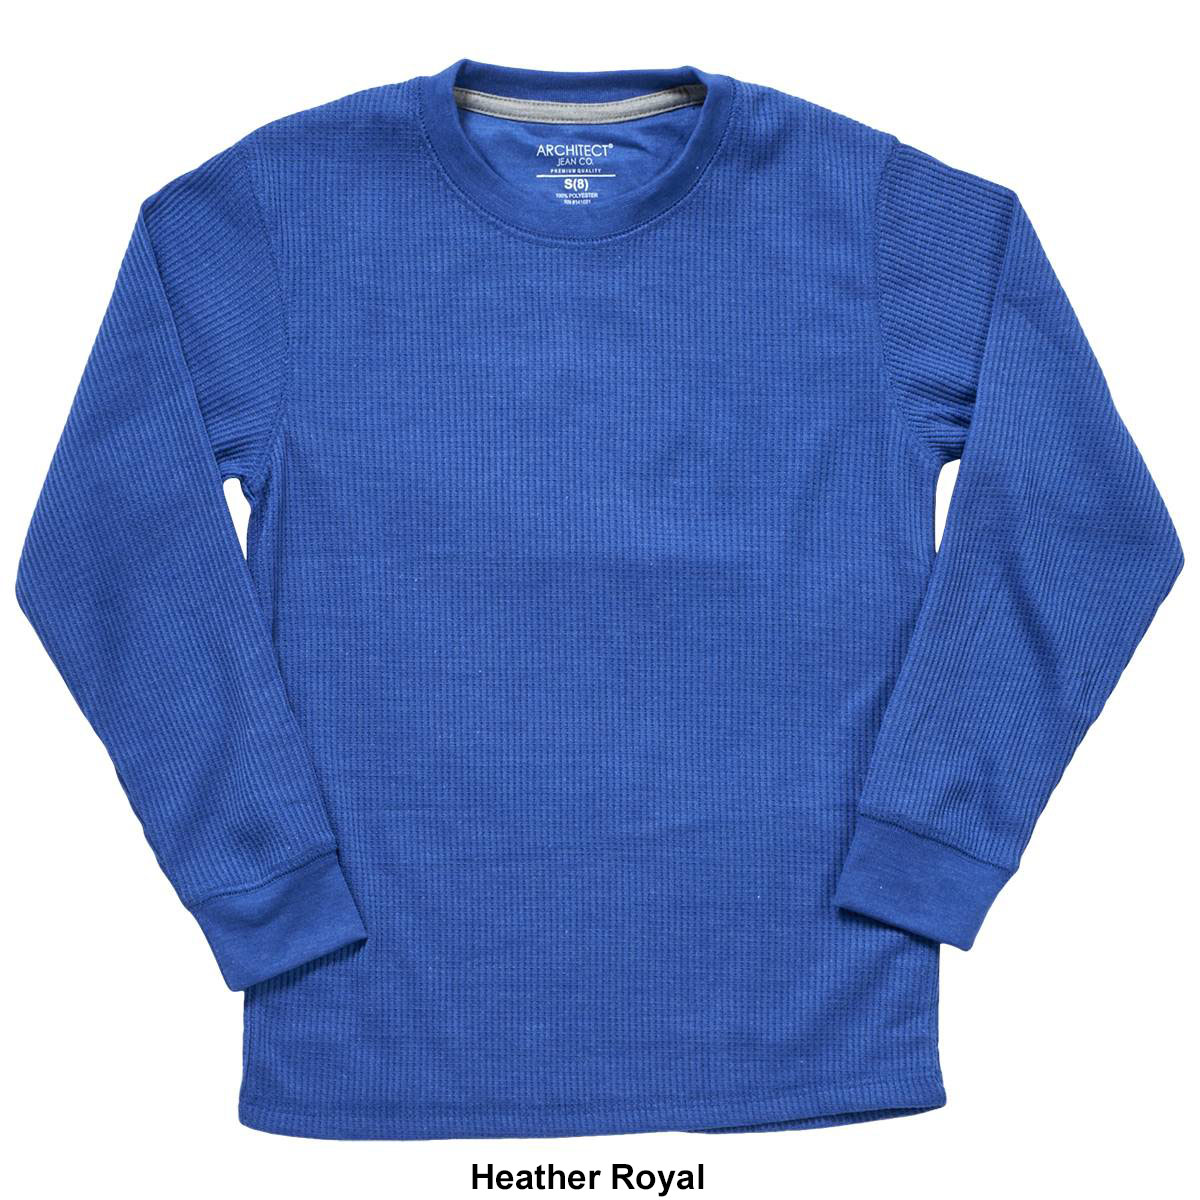 Boys (8-20) Architect(R) Jean Co. Solid Thermal Crew Neck T-Shirt